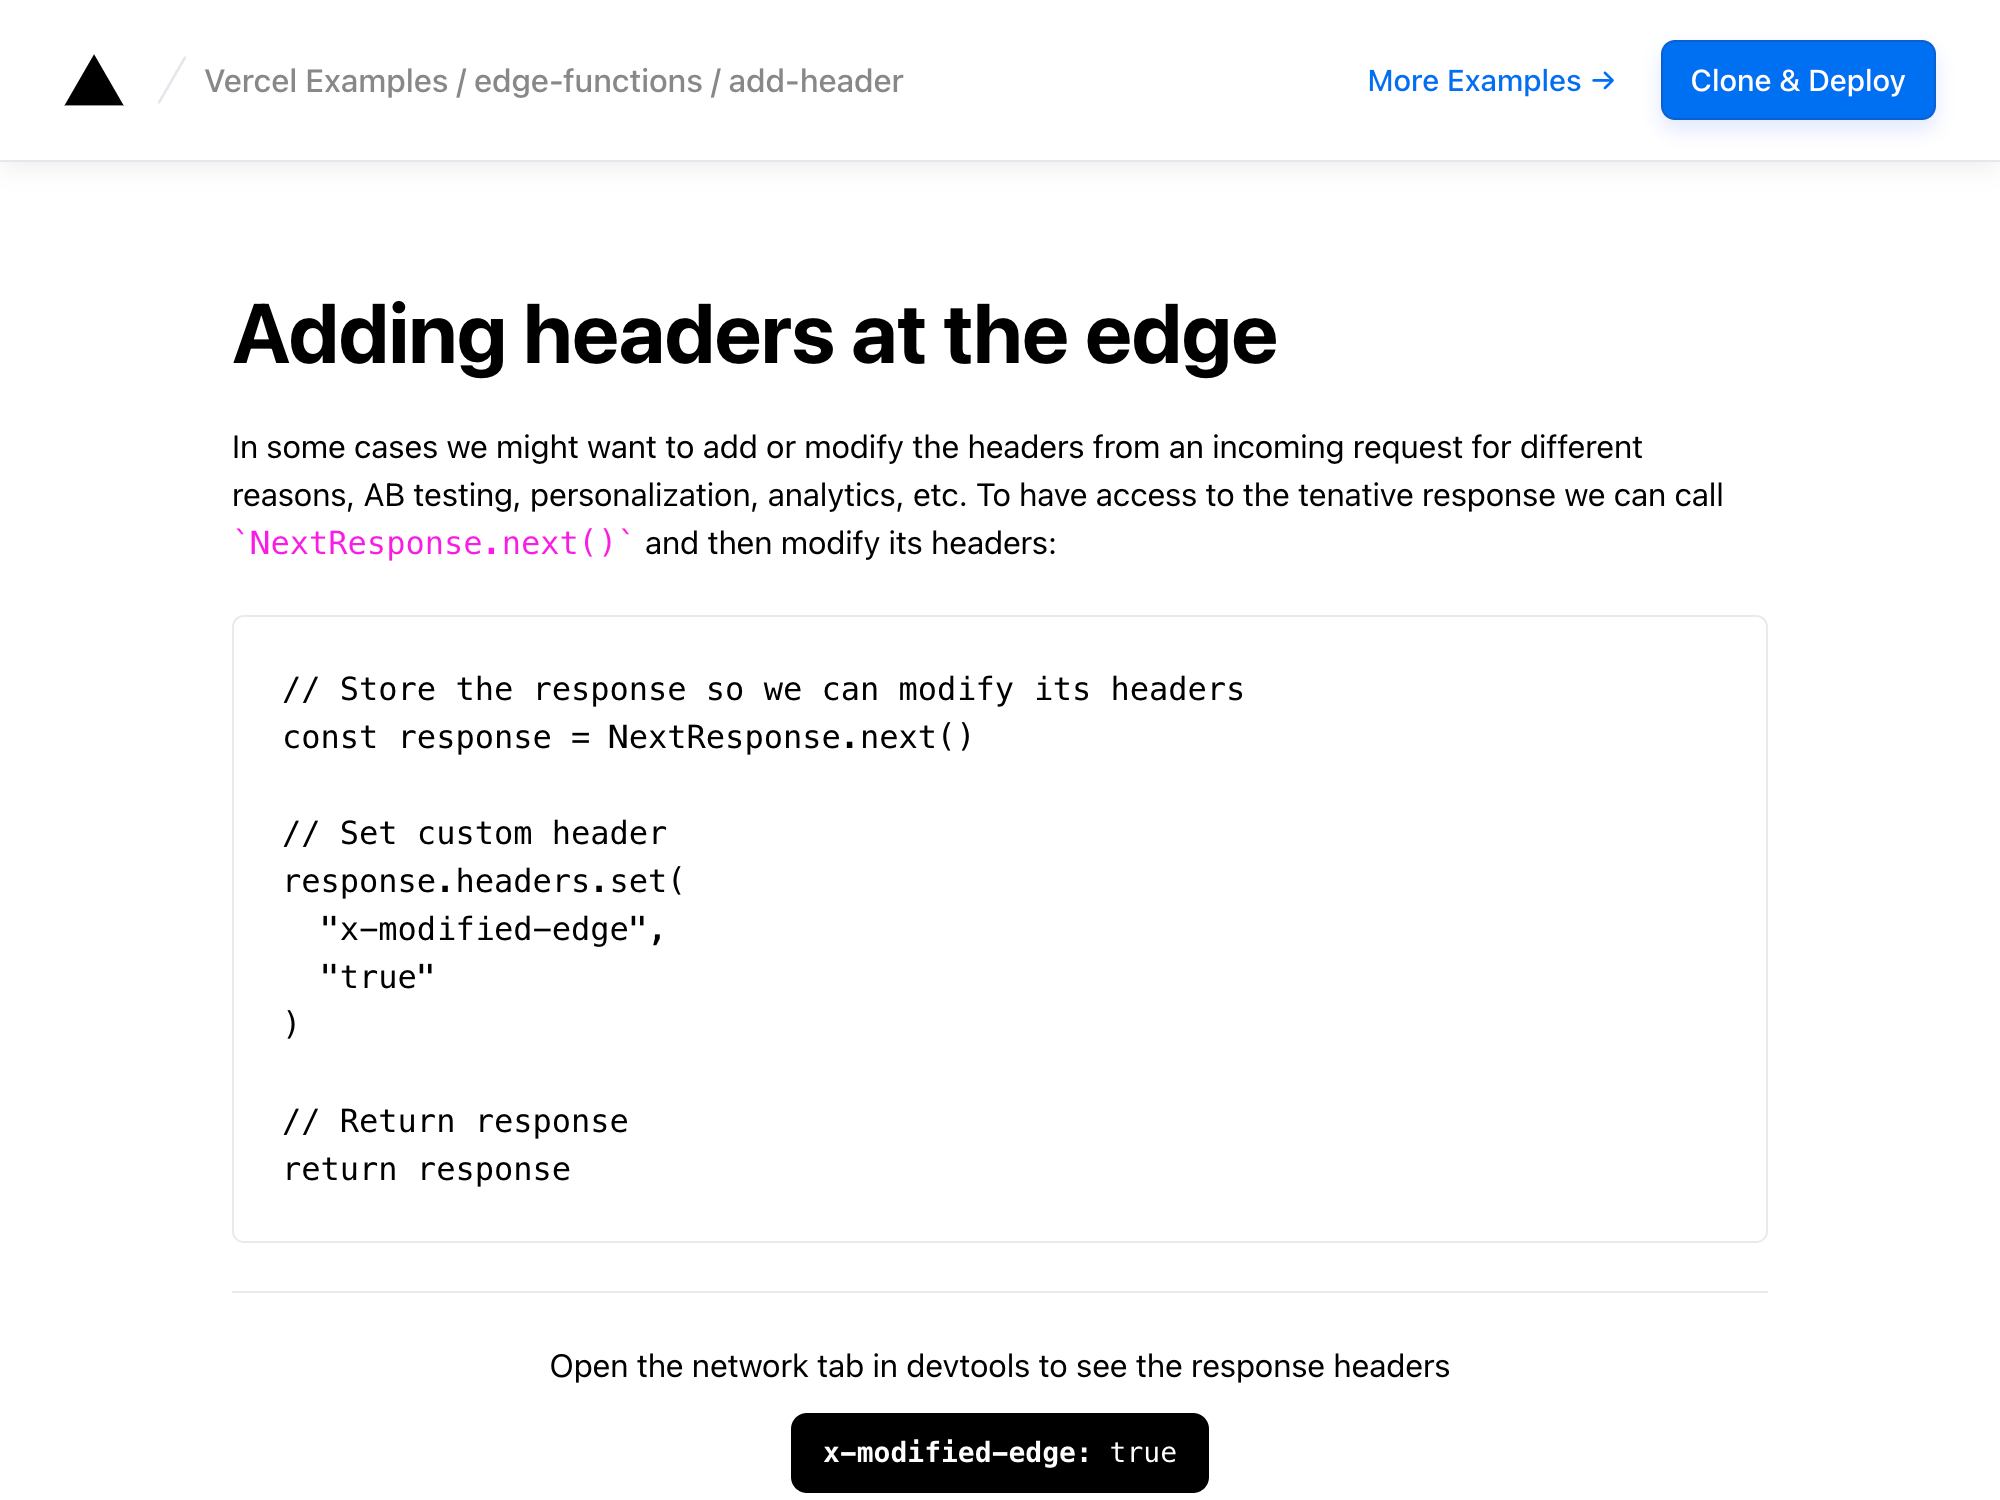 Adding Headers in Edge Functions